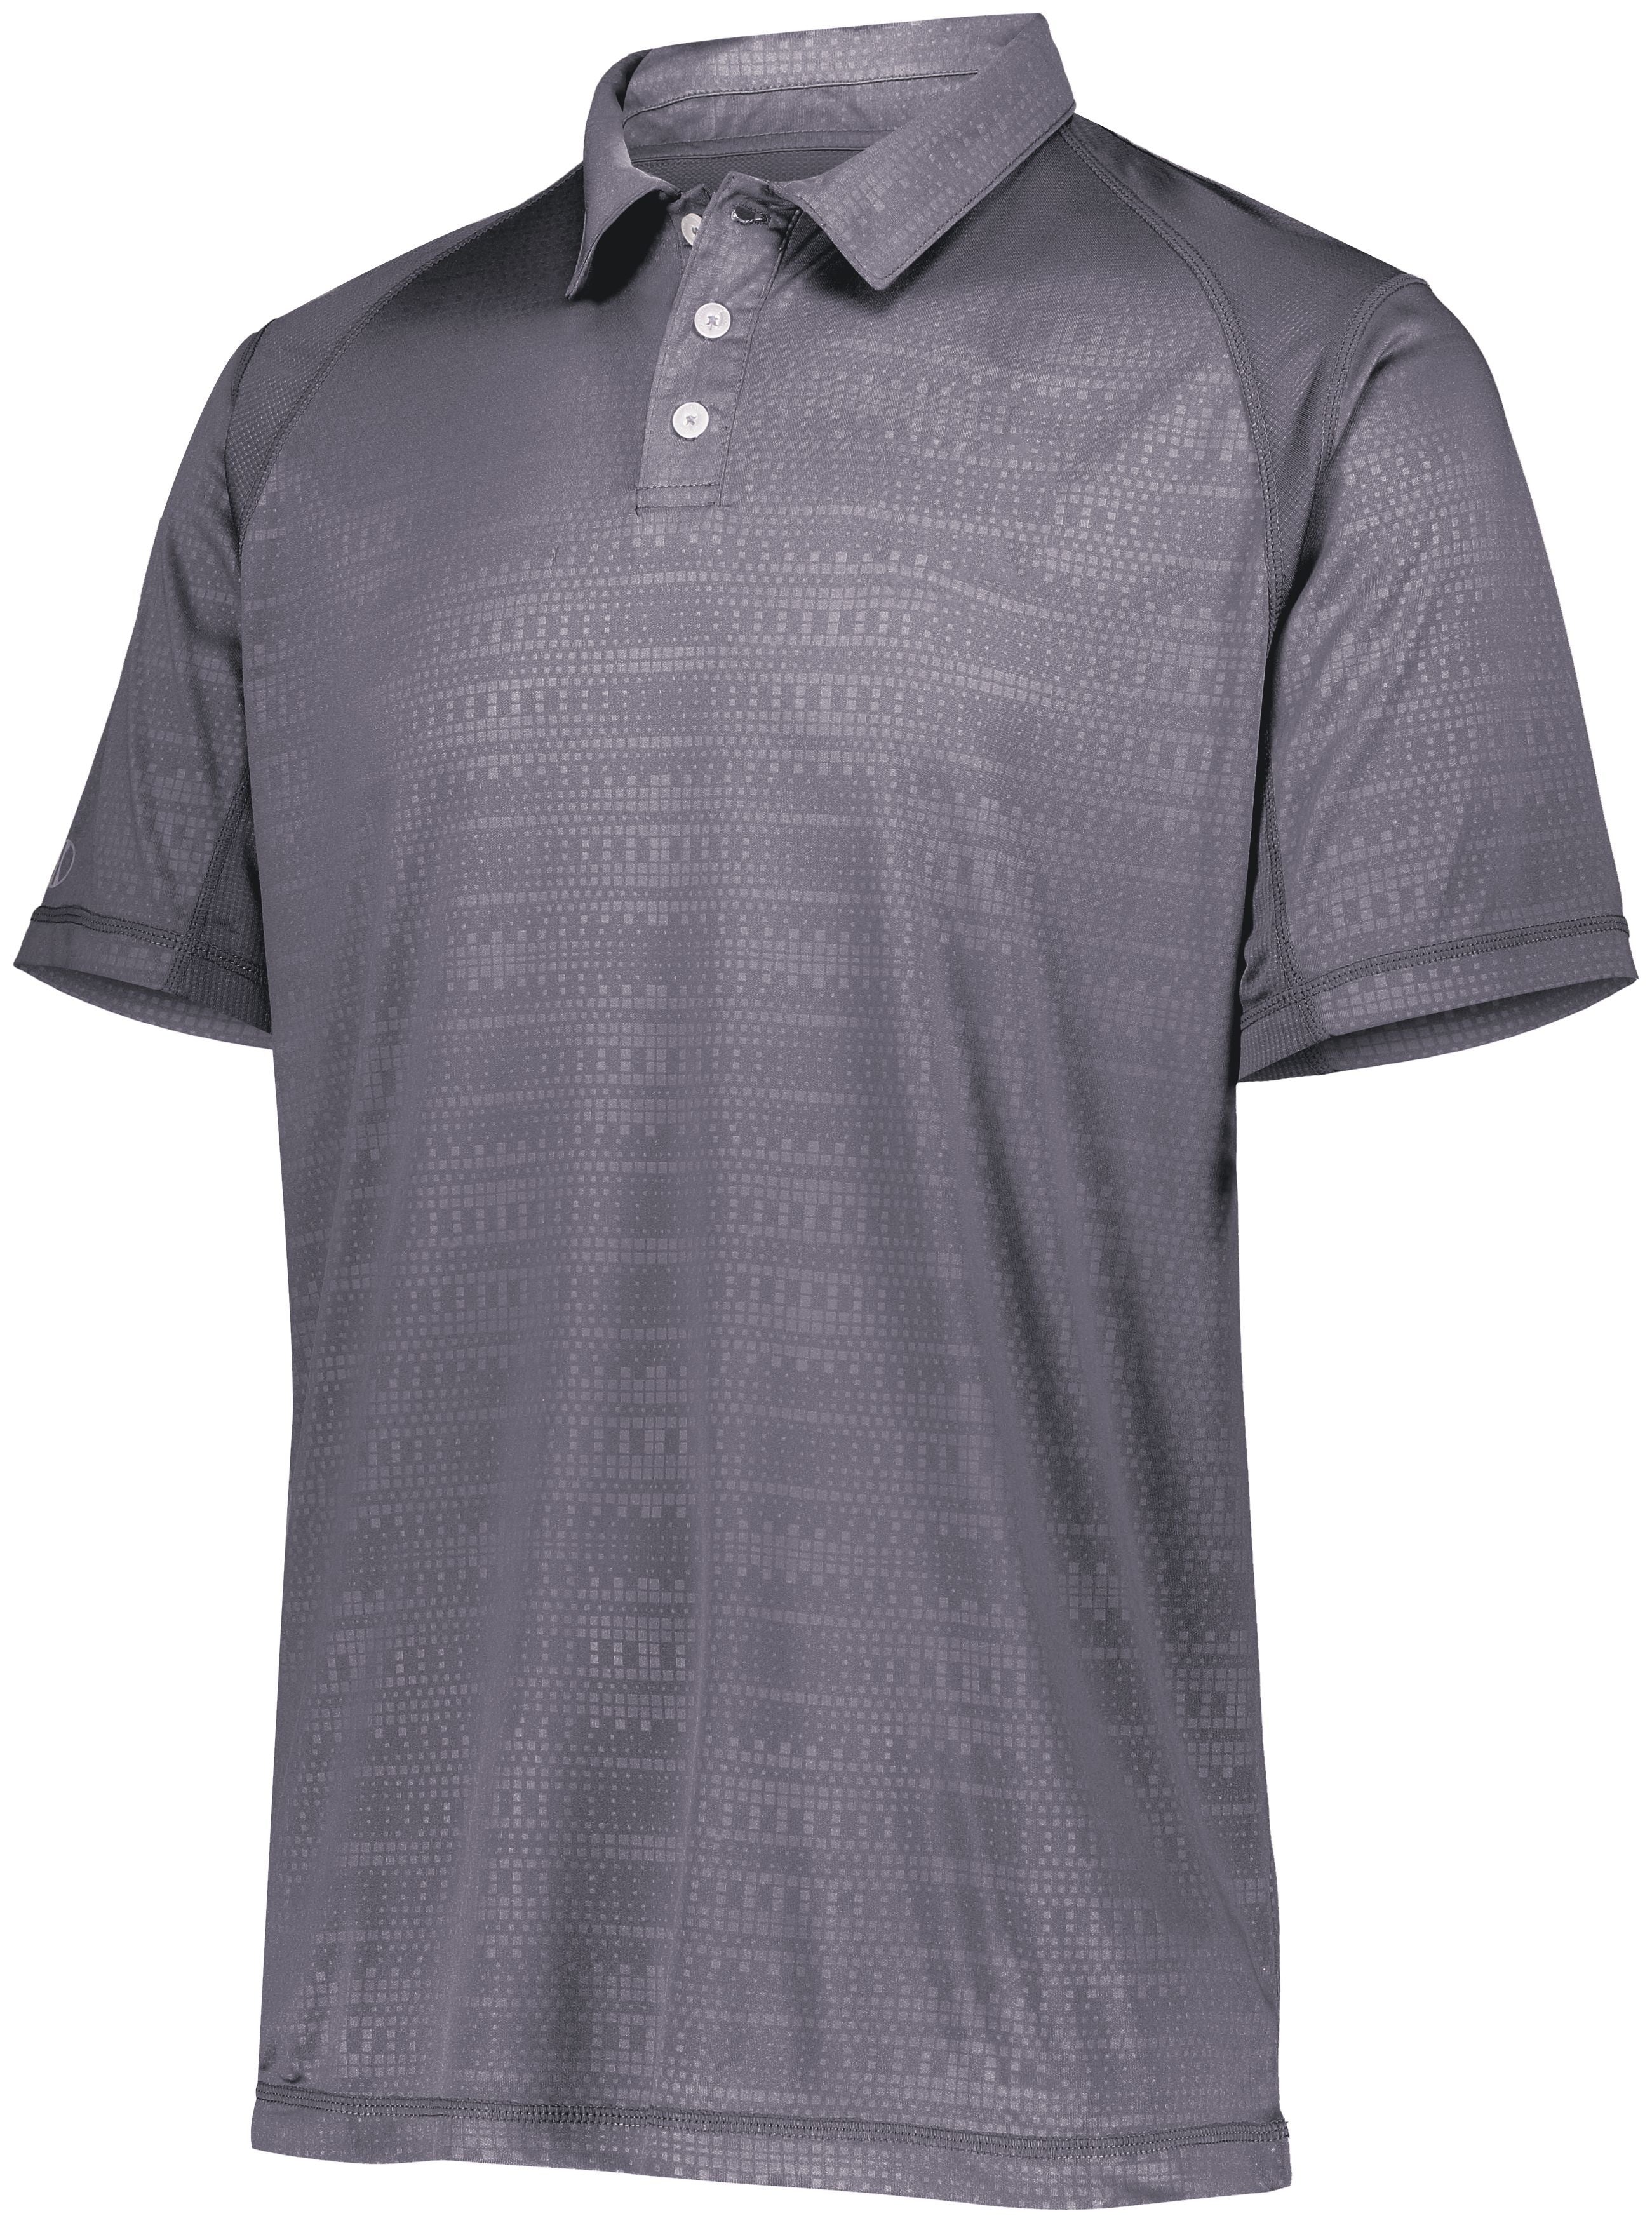 Holloway Converge Polo in Graphite  -Part of the Adult, Adult-Polos, Polos, Holloway, Shirts, Converge-Collection product lines at KanaleyCreations.com